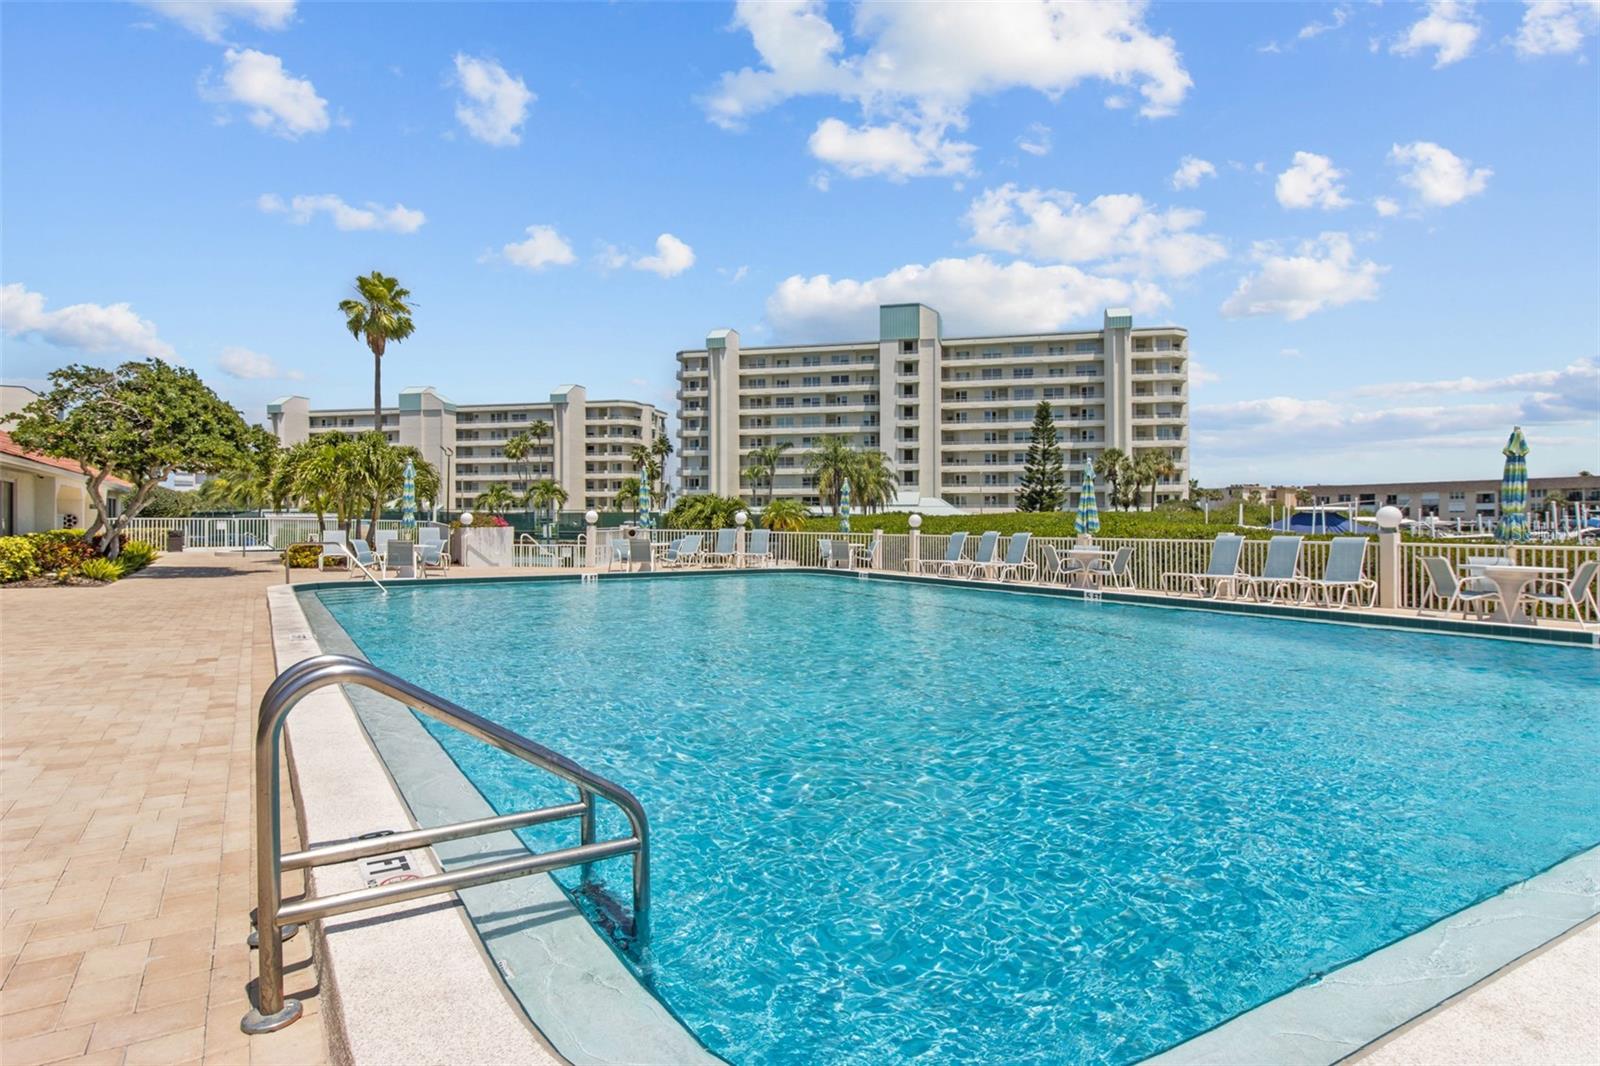 The community has 6 pools within the development which can be enjoyed year round!